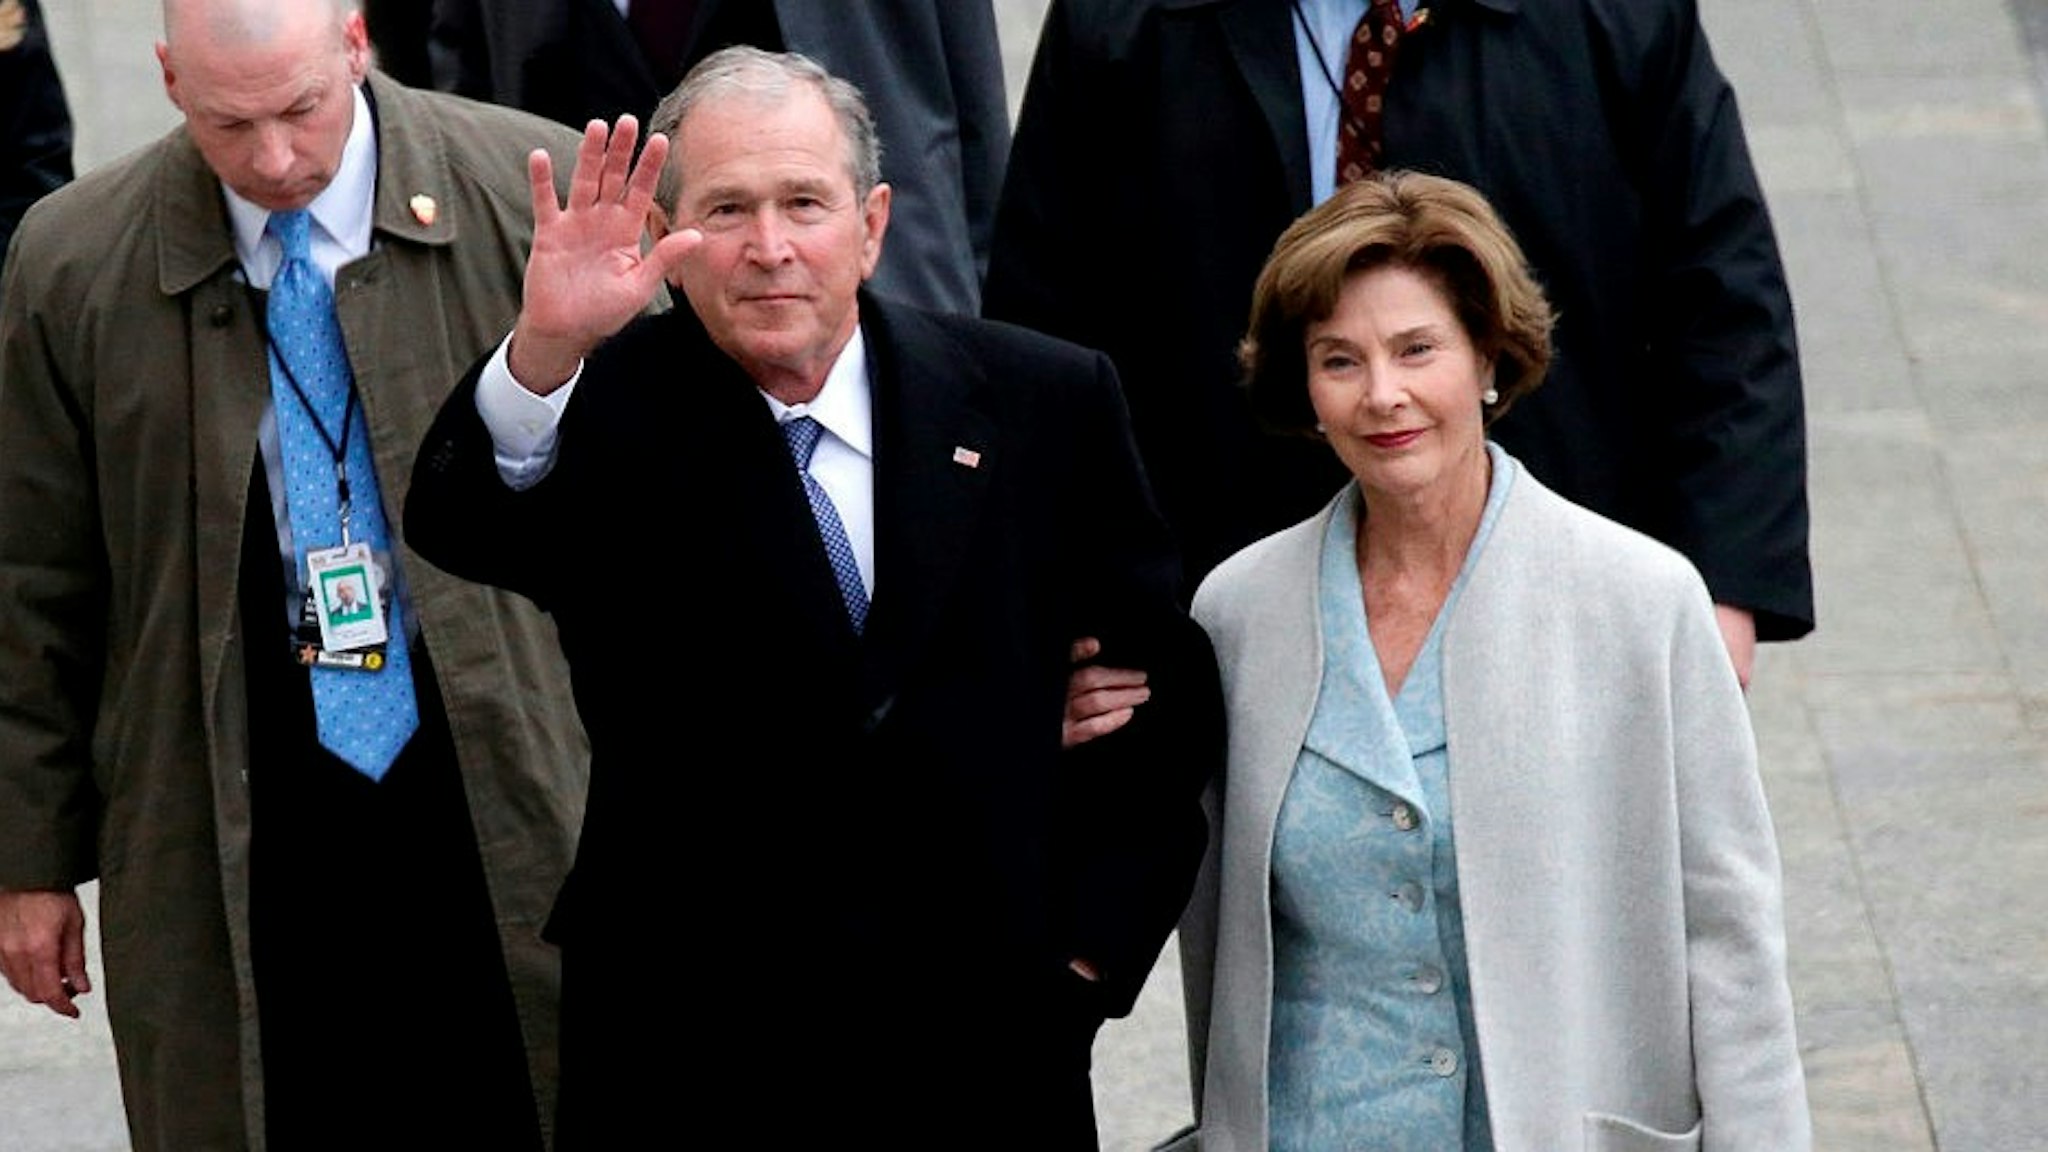 WASHINGTON, DC - JANUARY 20: Former U.S. President of the United States George W. Bush and wife Laura Bush arrive near the east front steps of the Capitol Building before President-elect Donald Trump is sworn in at the 58th Presidential Inauguration on Capitol Hill on January 20, 2017 in Washington, D.C. In today's inauguration ceremony Donald J. Trump becomes the 45th president of the United States. (Photo by